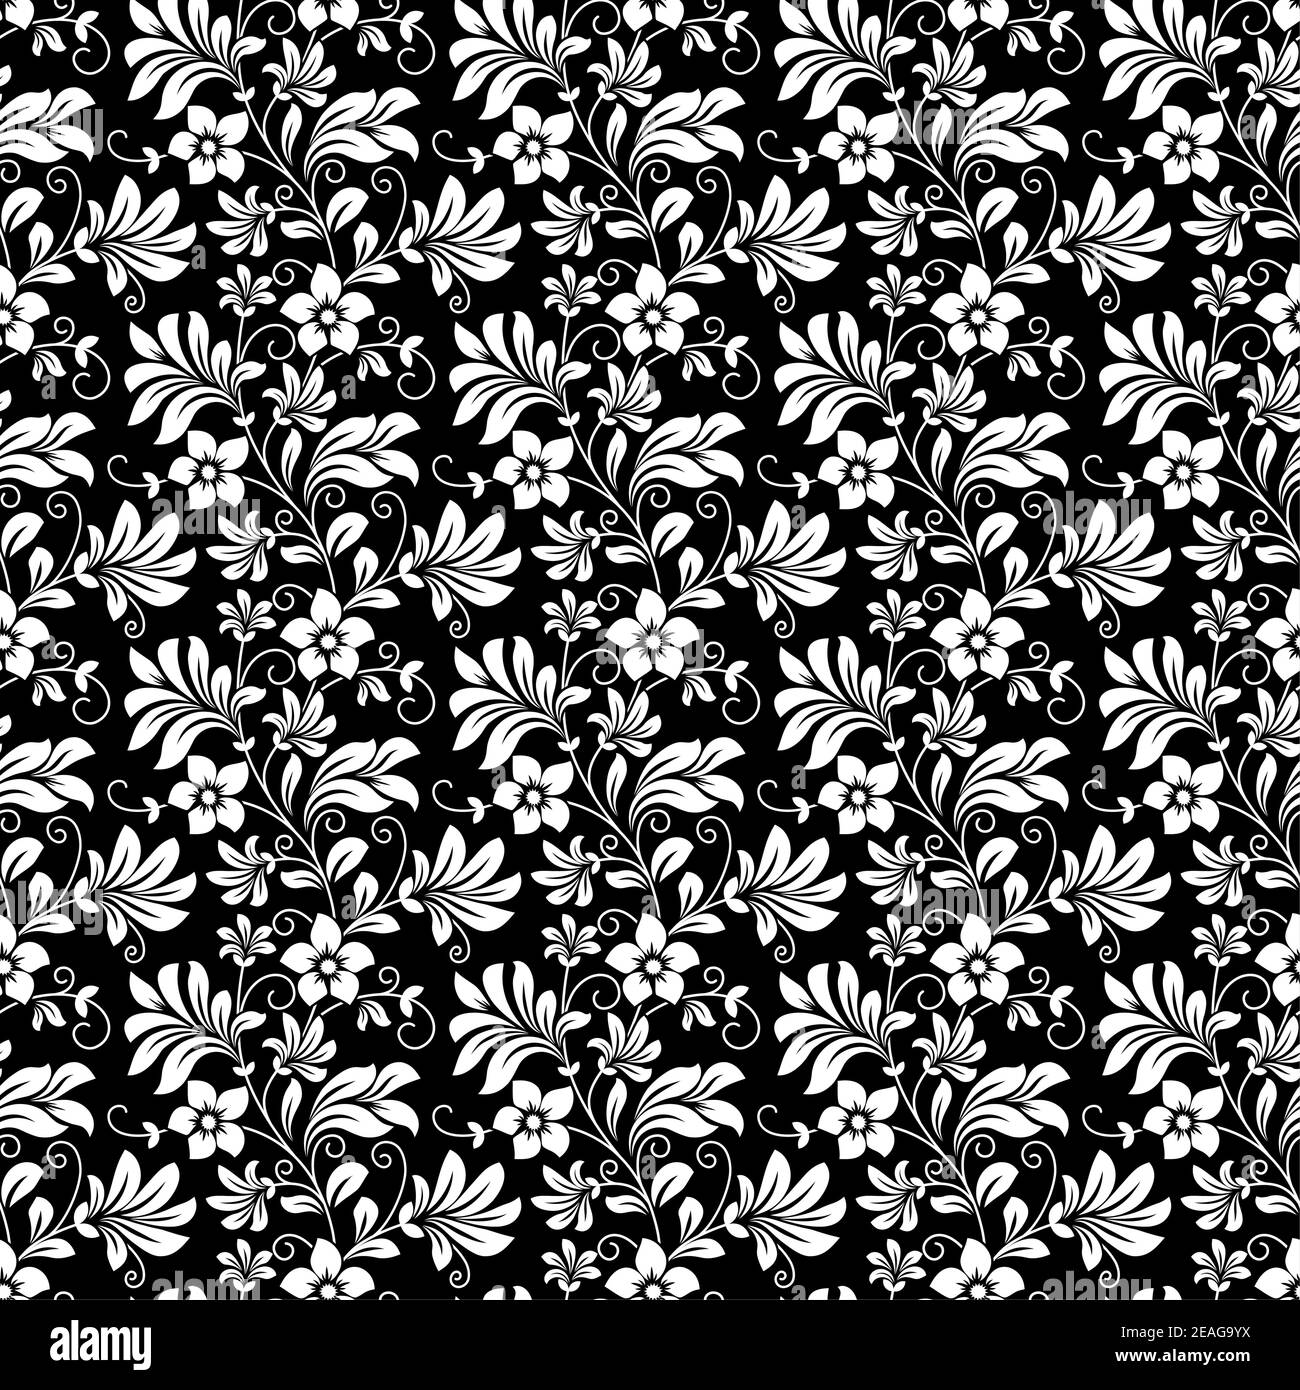 Beautiful intricate retro seamless floral pattern of densely packed dainty flowers in black and white suitable for wallpaper, tiles and fabric in squa Stock Vector